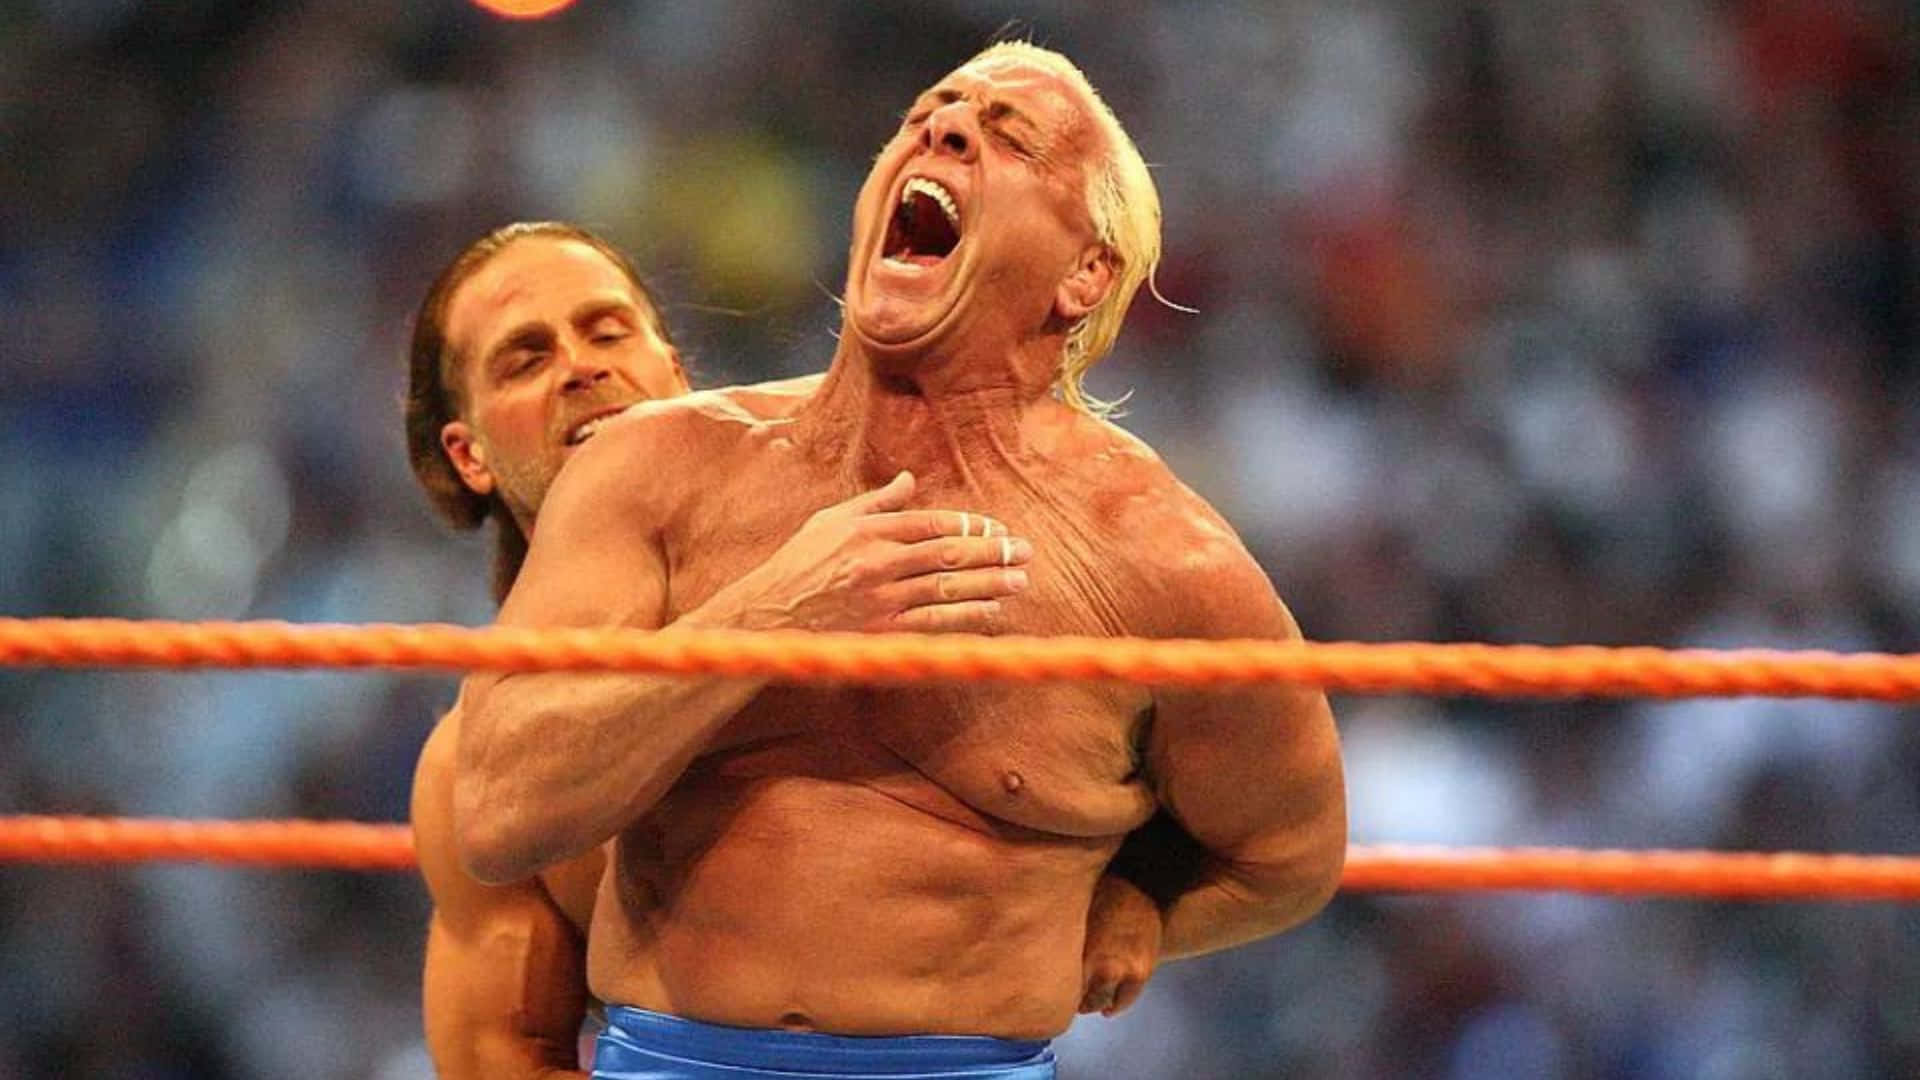 Ric Flair With Shawn Michaels Wrestlemania 24